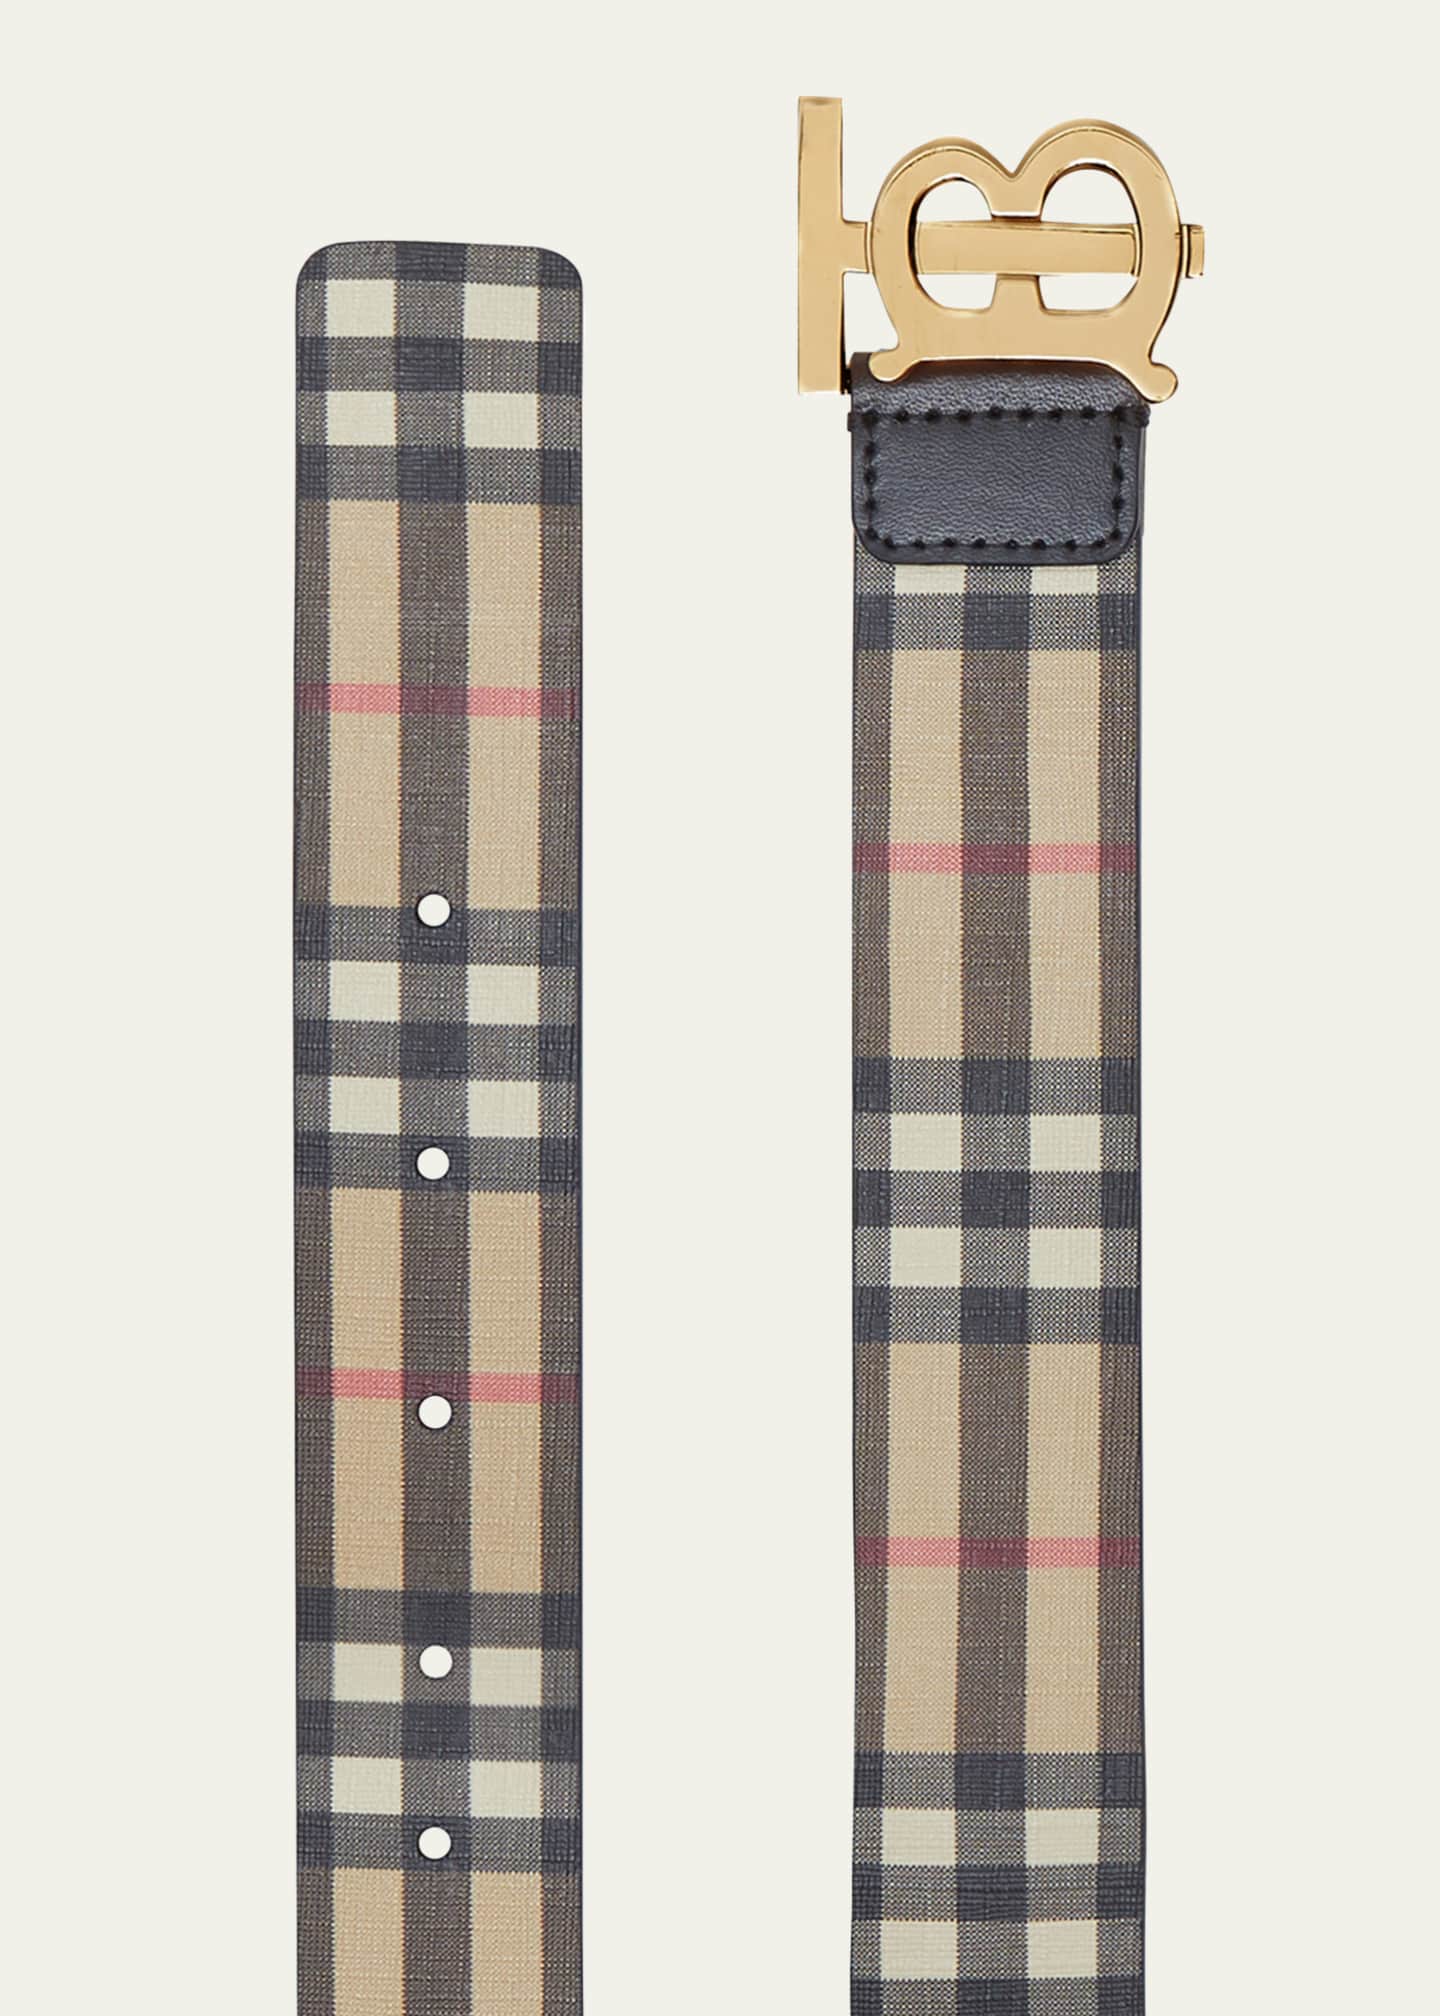 Burberry Vintage Check belt in coated canvas